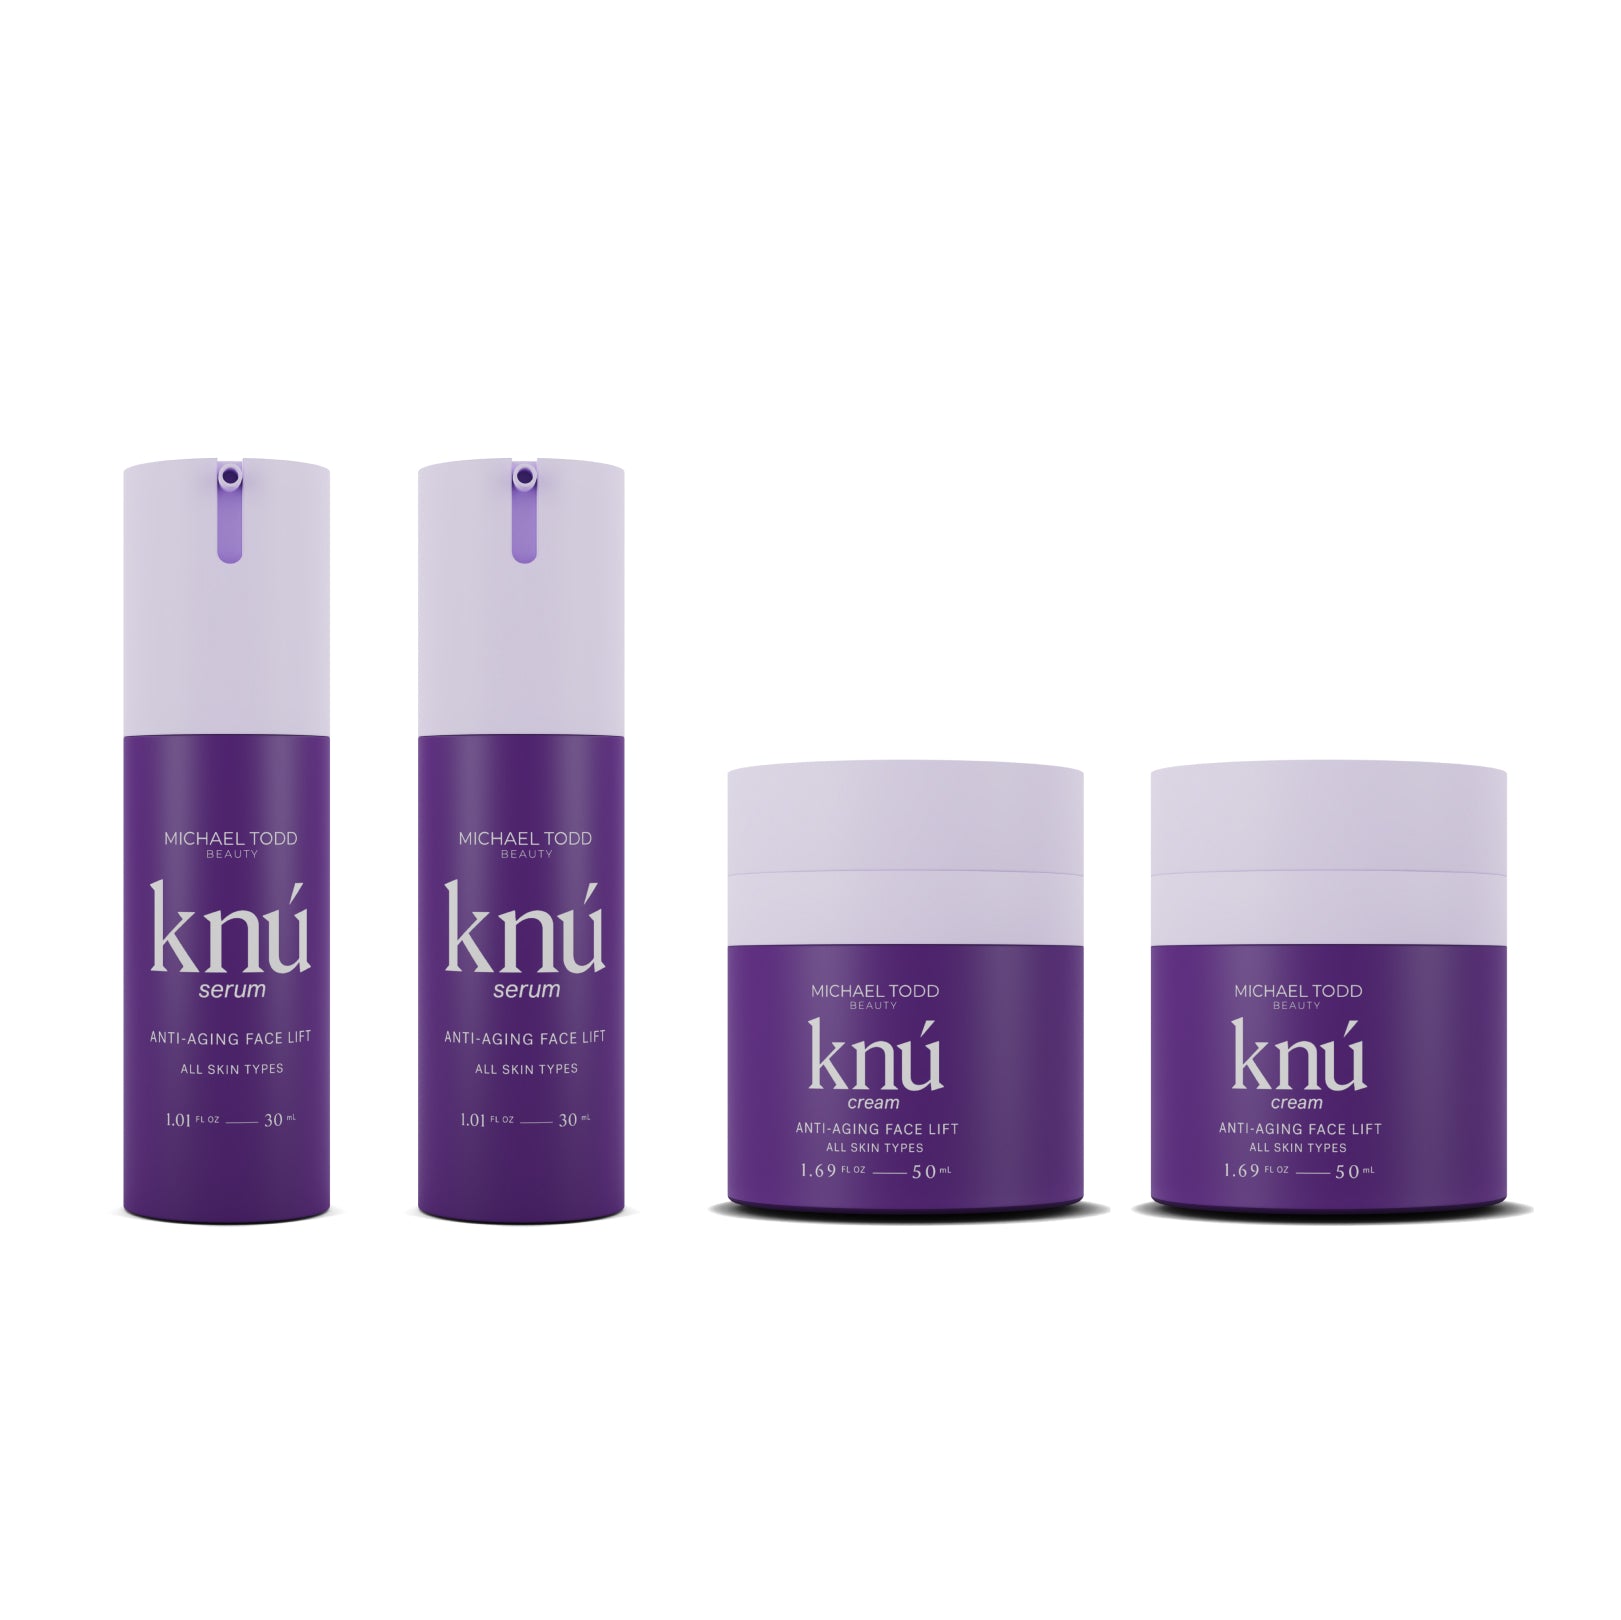 Knú Ageless Duo 60 Day Starter Set skin care set designed to target fine lines with a powerful cream and serum combination by Michael Todd Beauty.